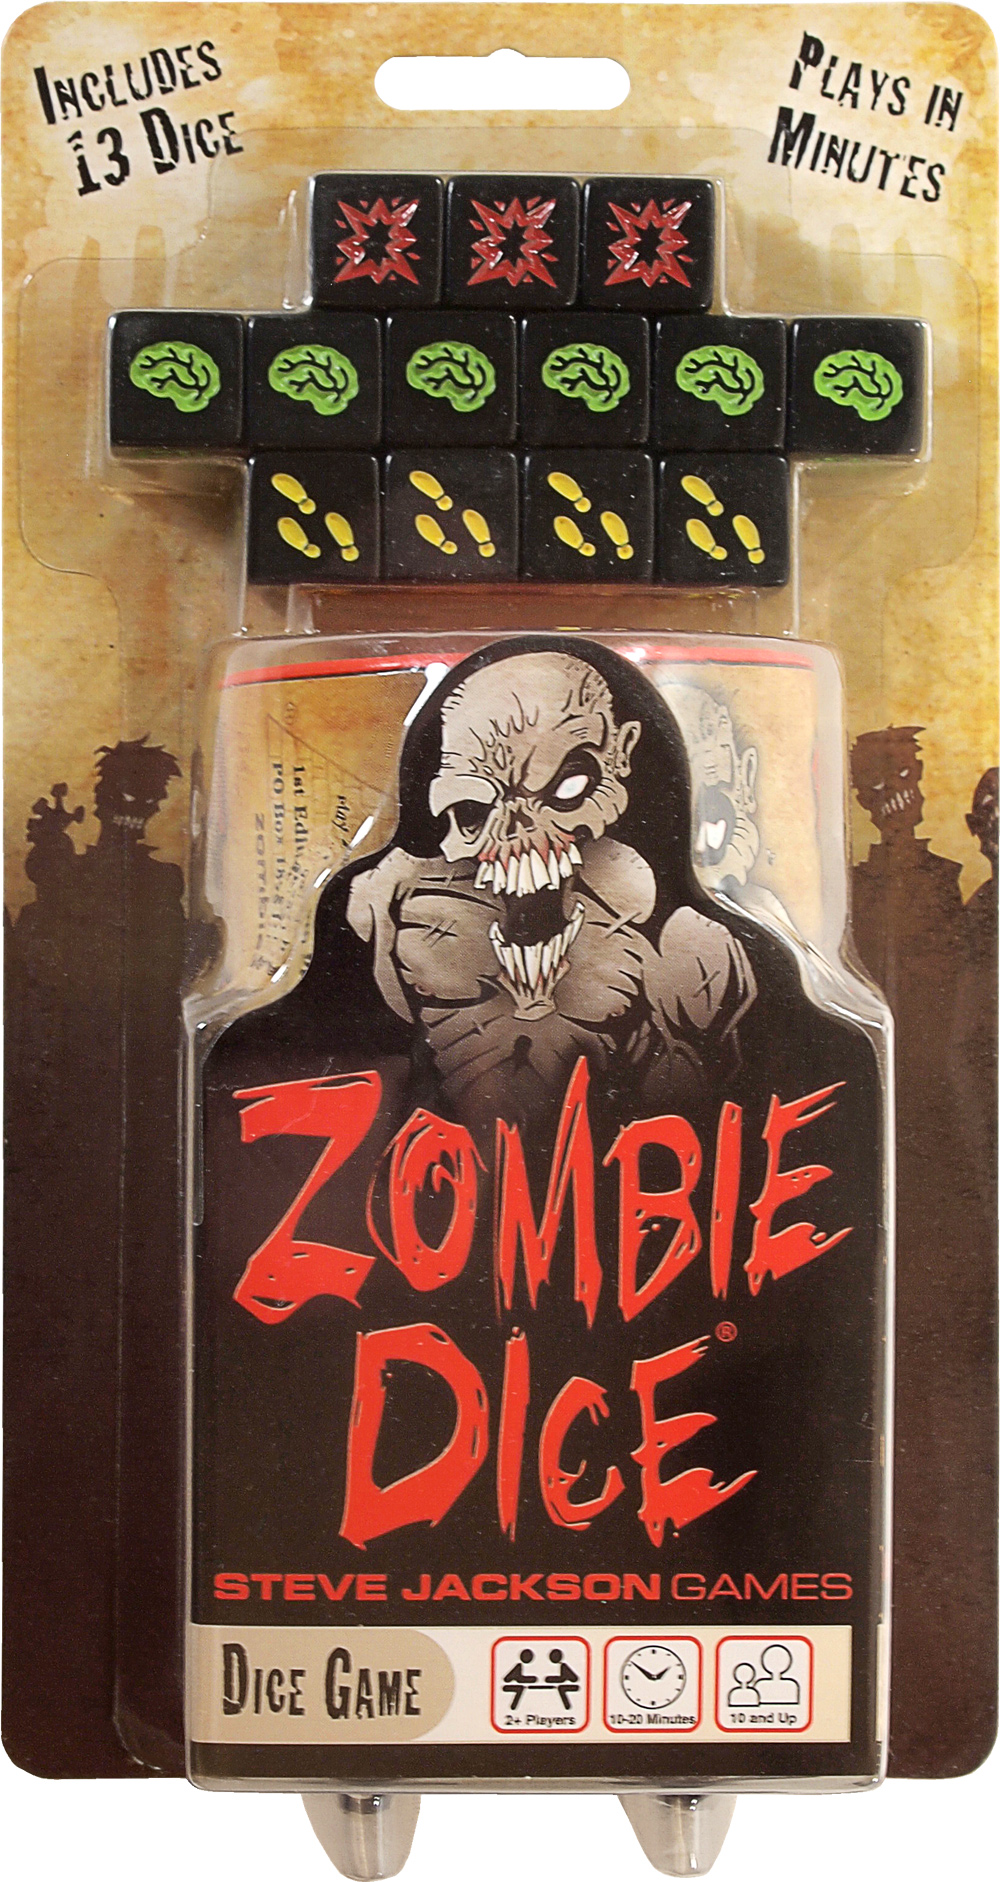 zombie dice game includes 13 dice